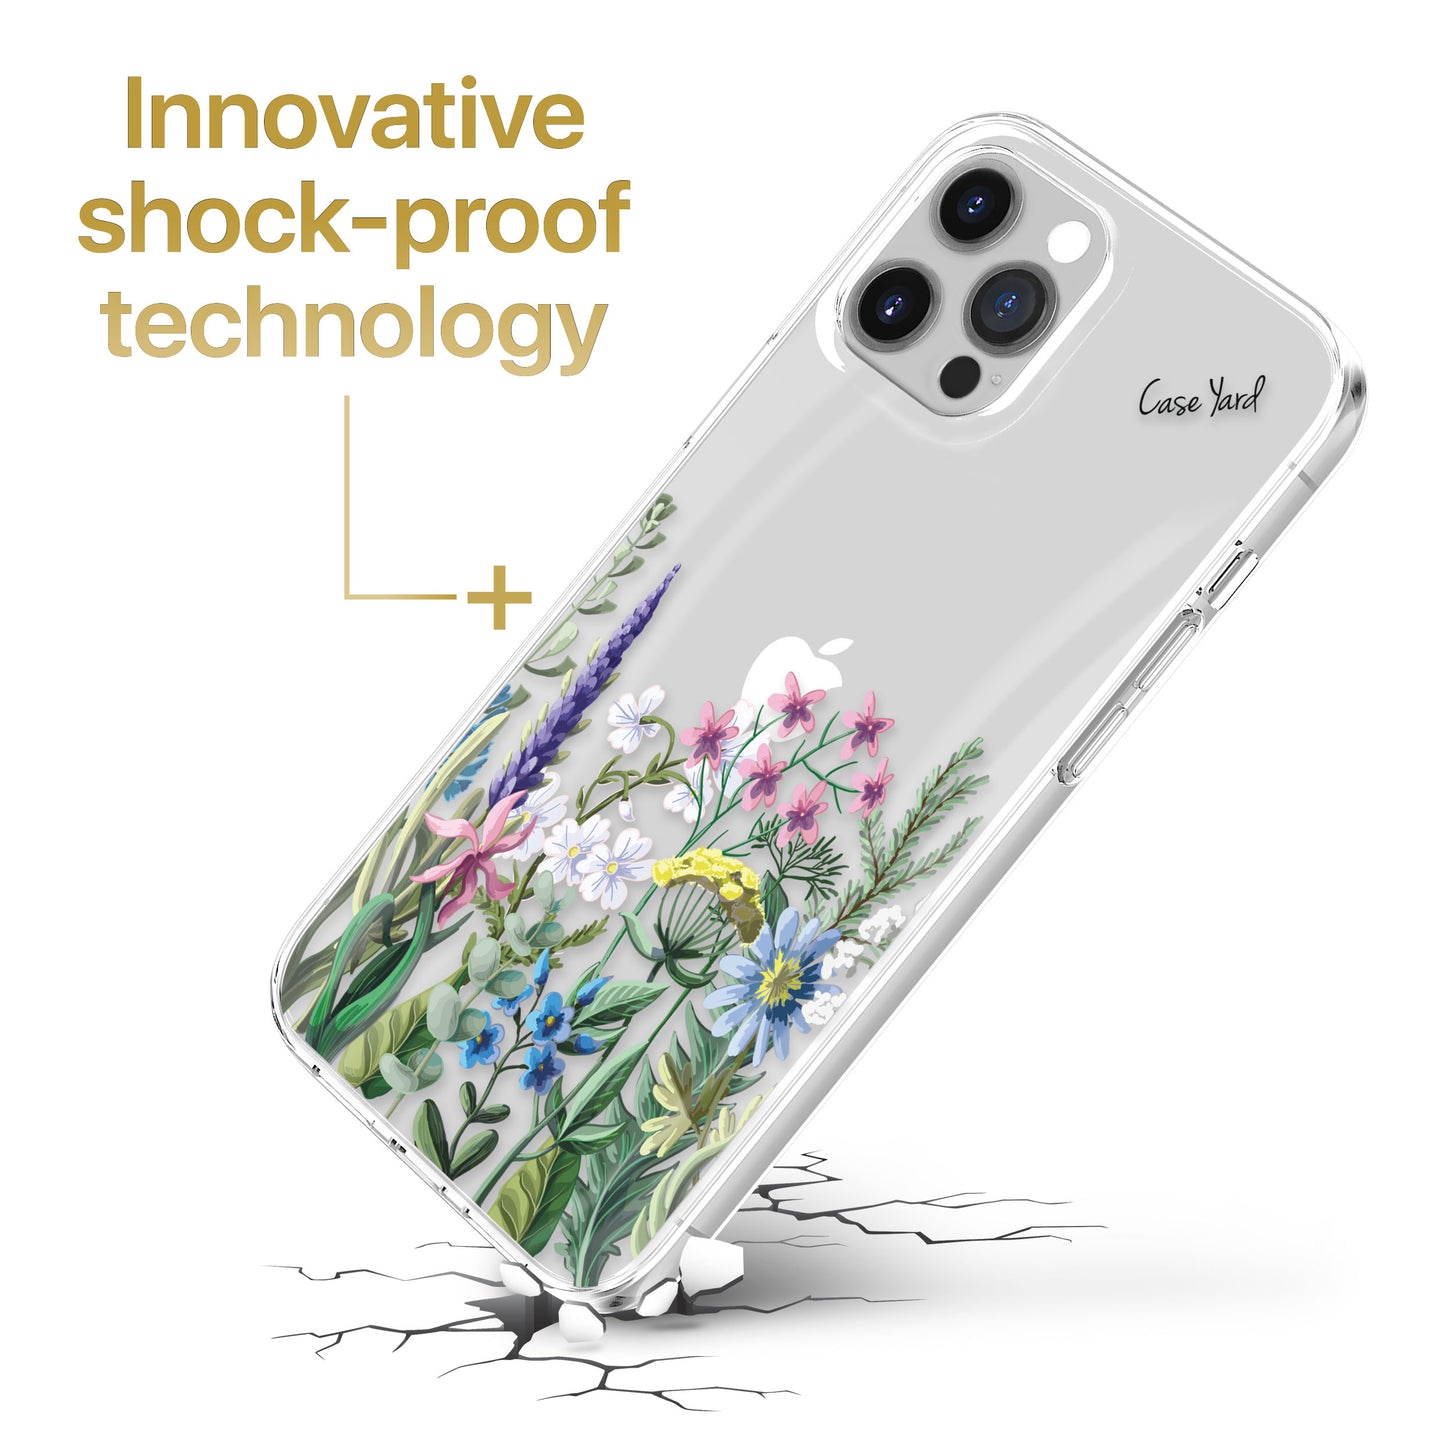 TPU Clear case with (Flower Bouquet) Design for iPhone & Samsung Phones